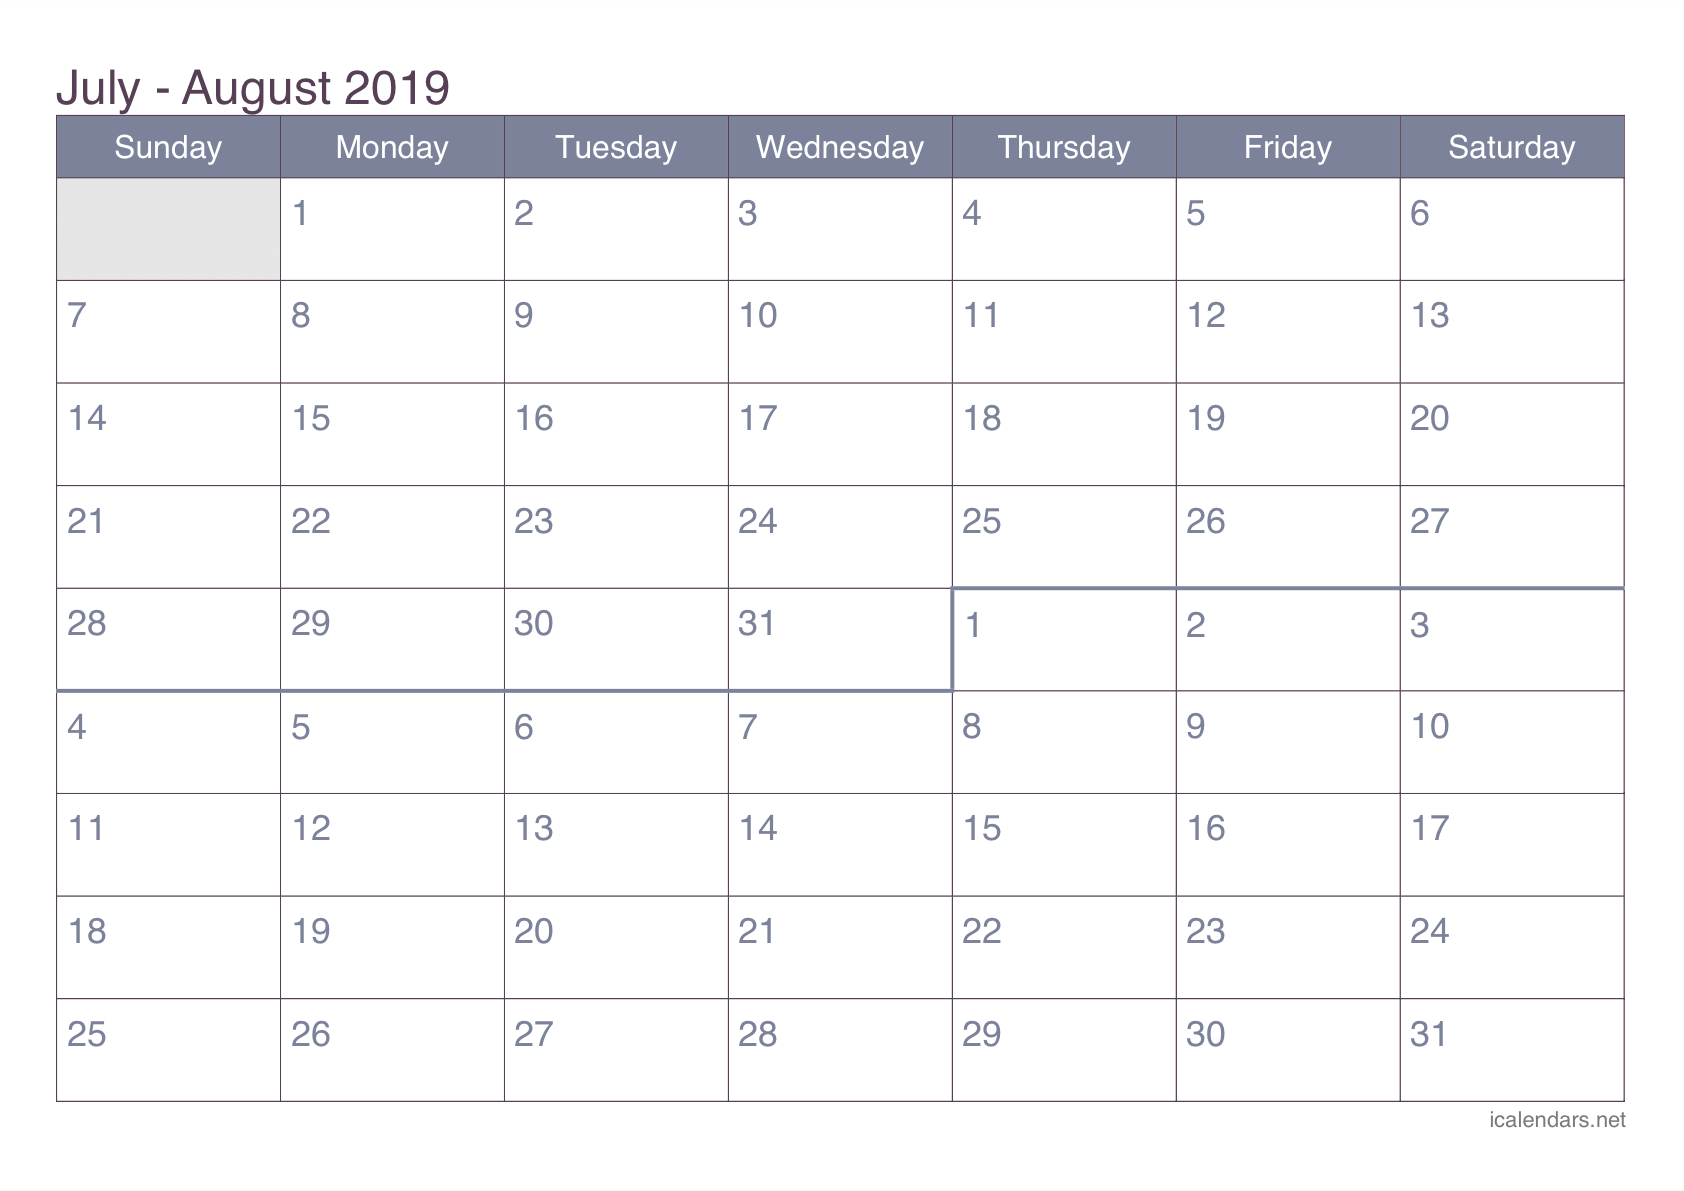 July And August 2019 Printable Calendar - Icalendars